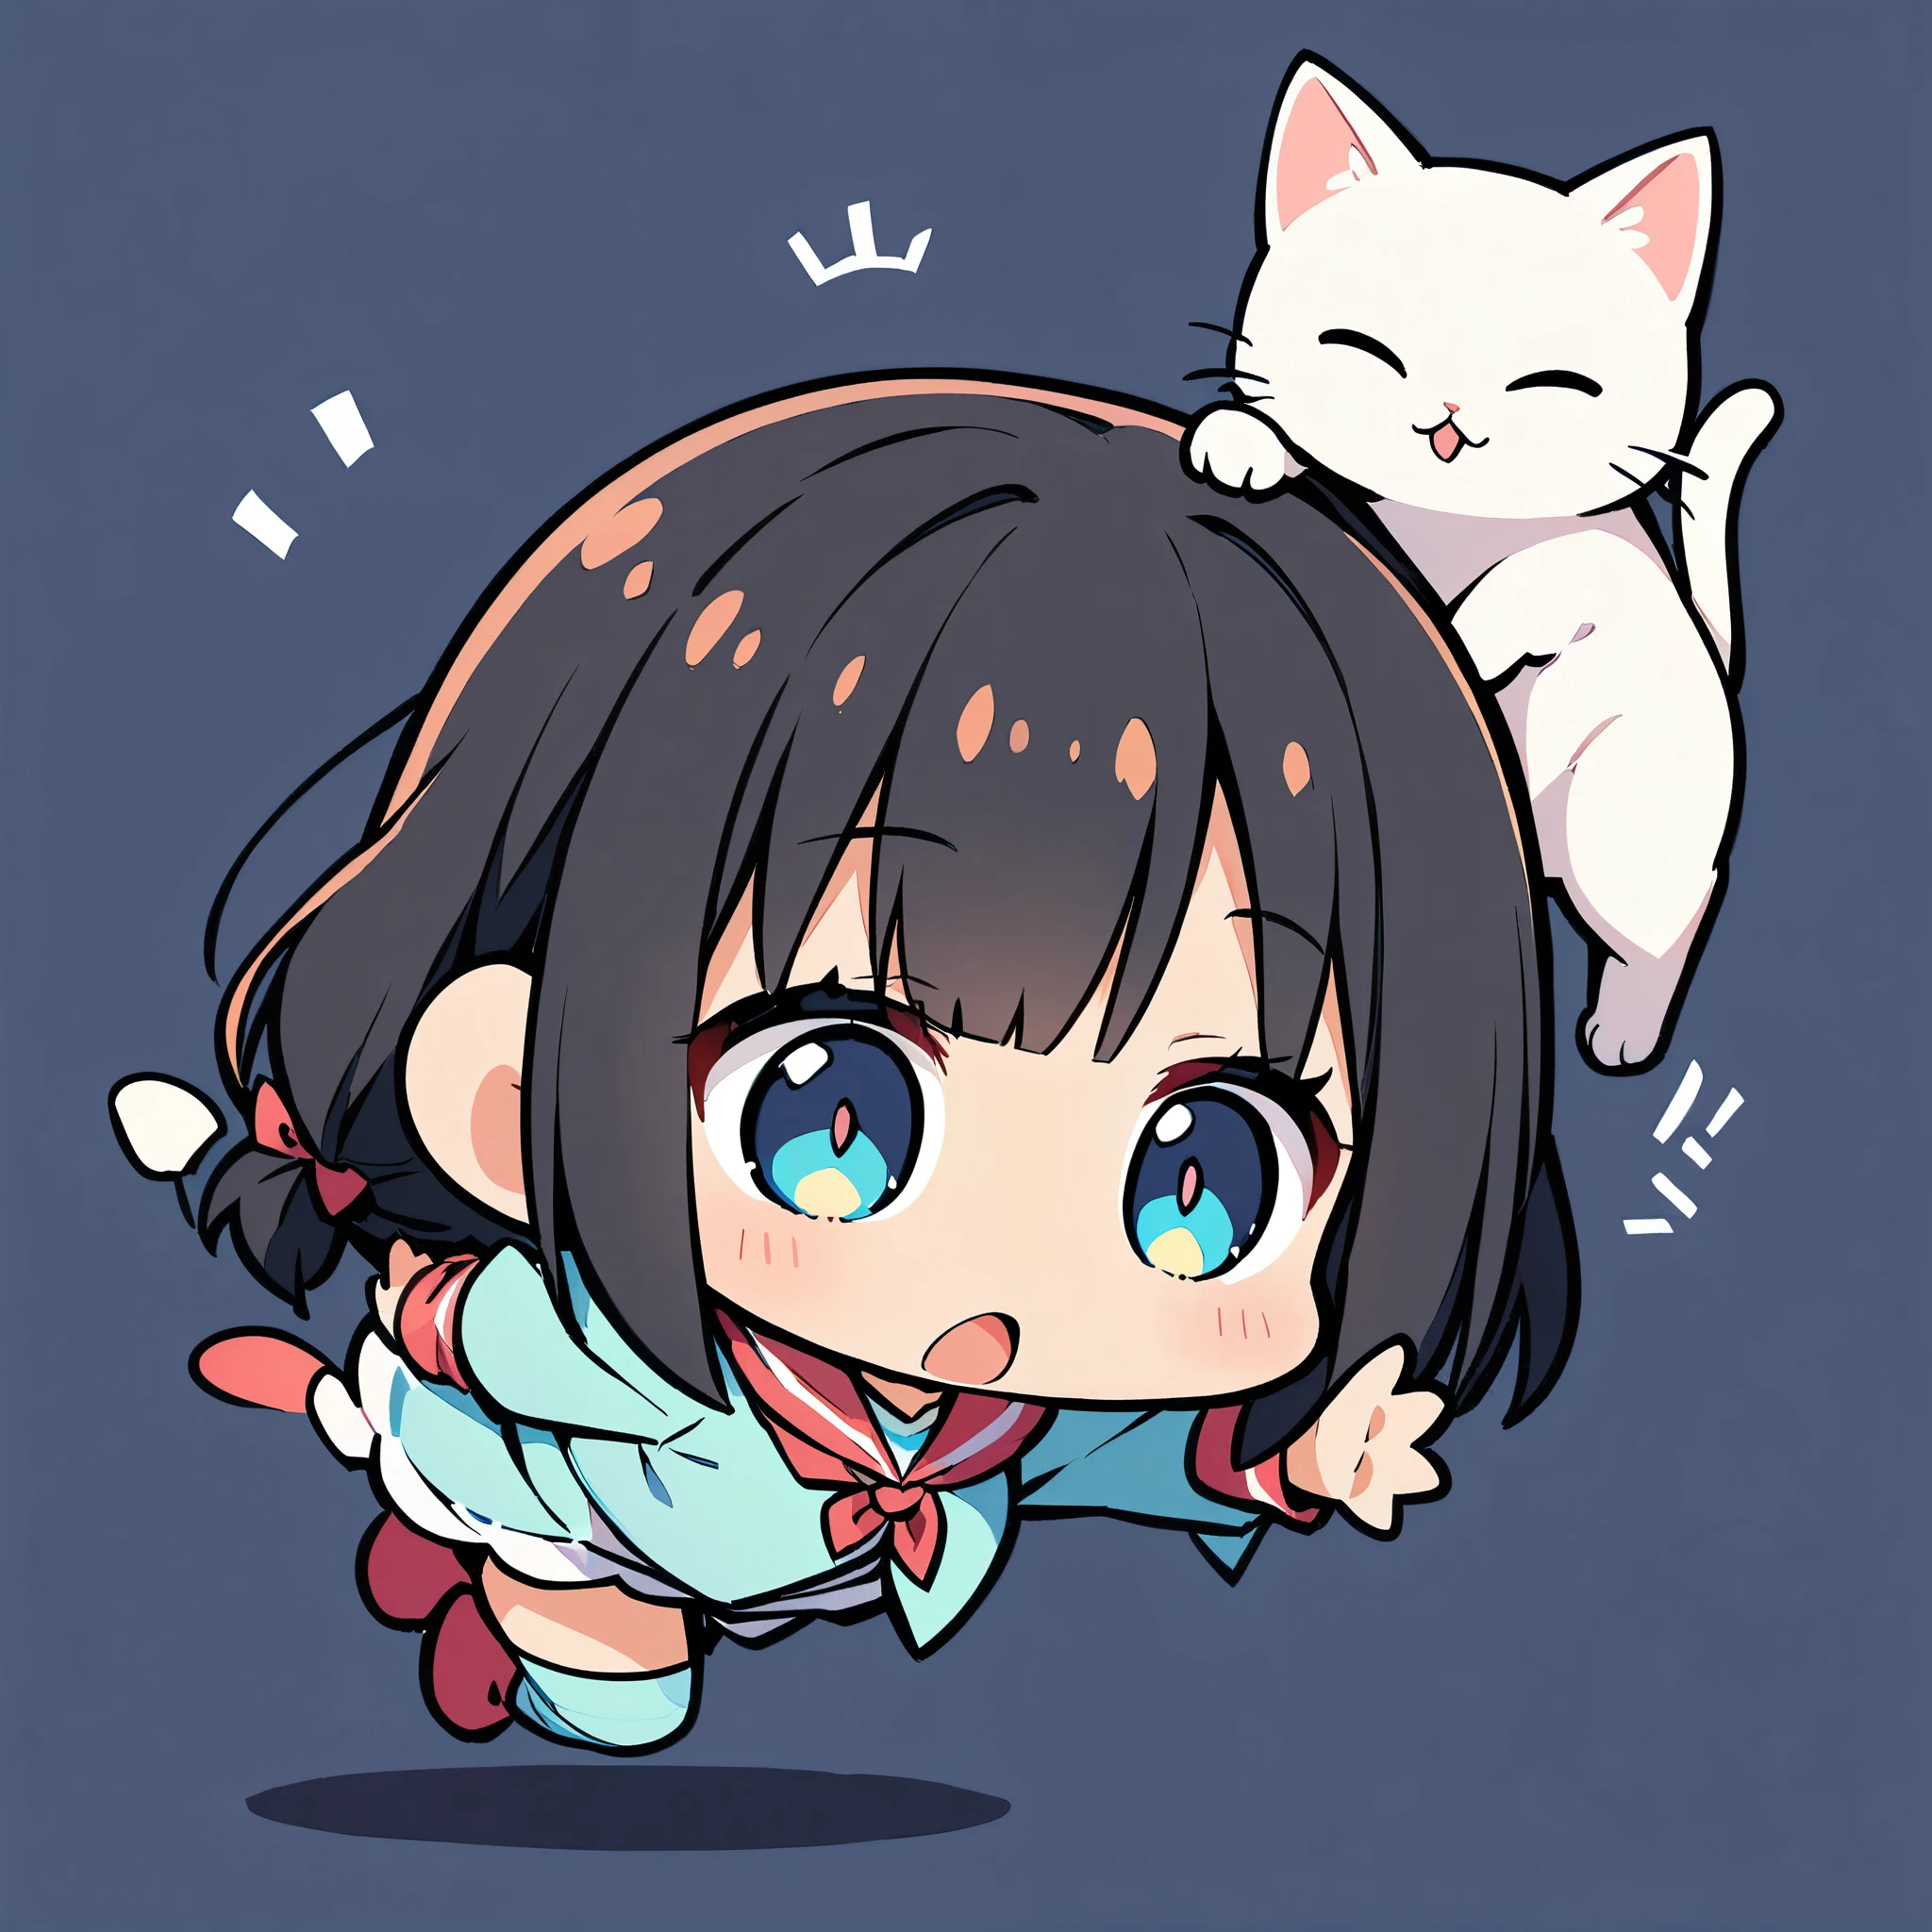 A girl and a cute cat, Cat and girl, Deformation, White cat, Black Hair Girl, Solid color background, 